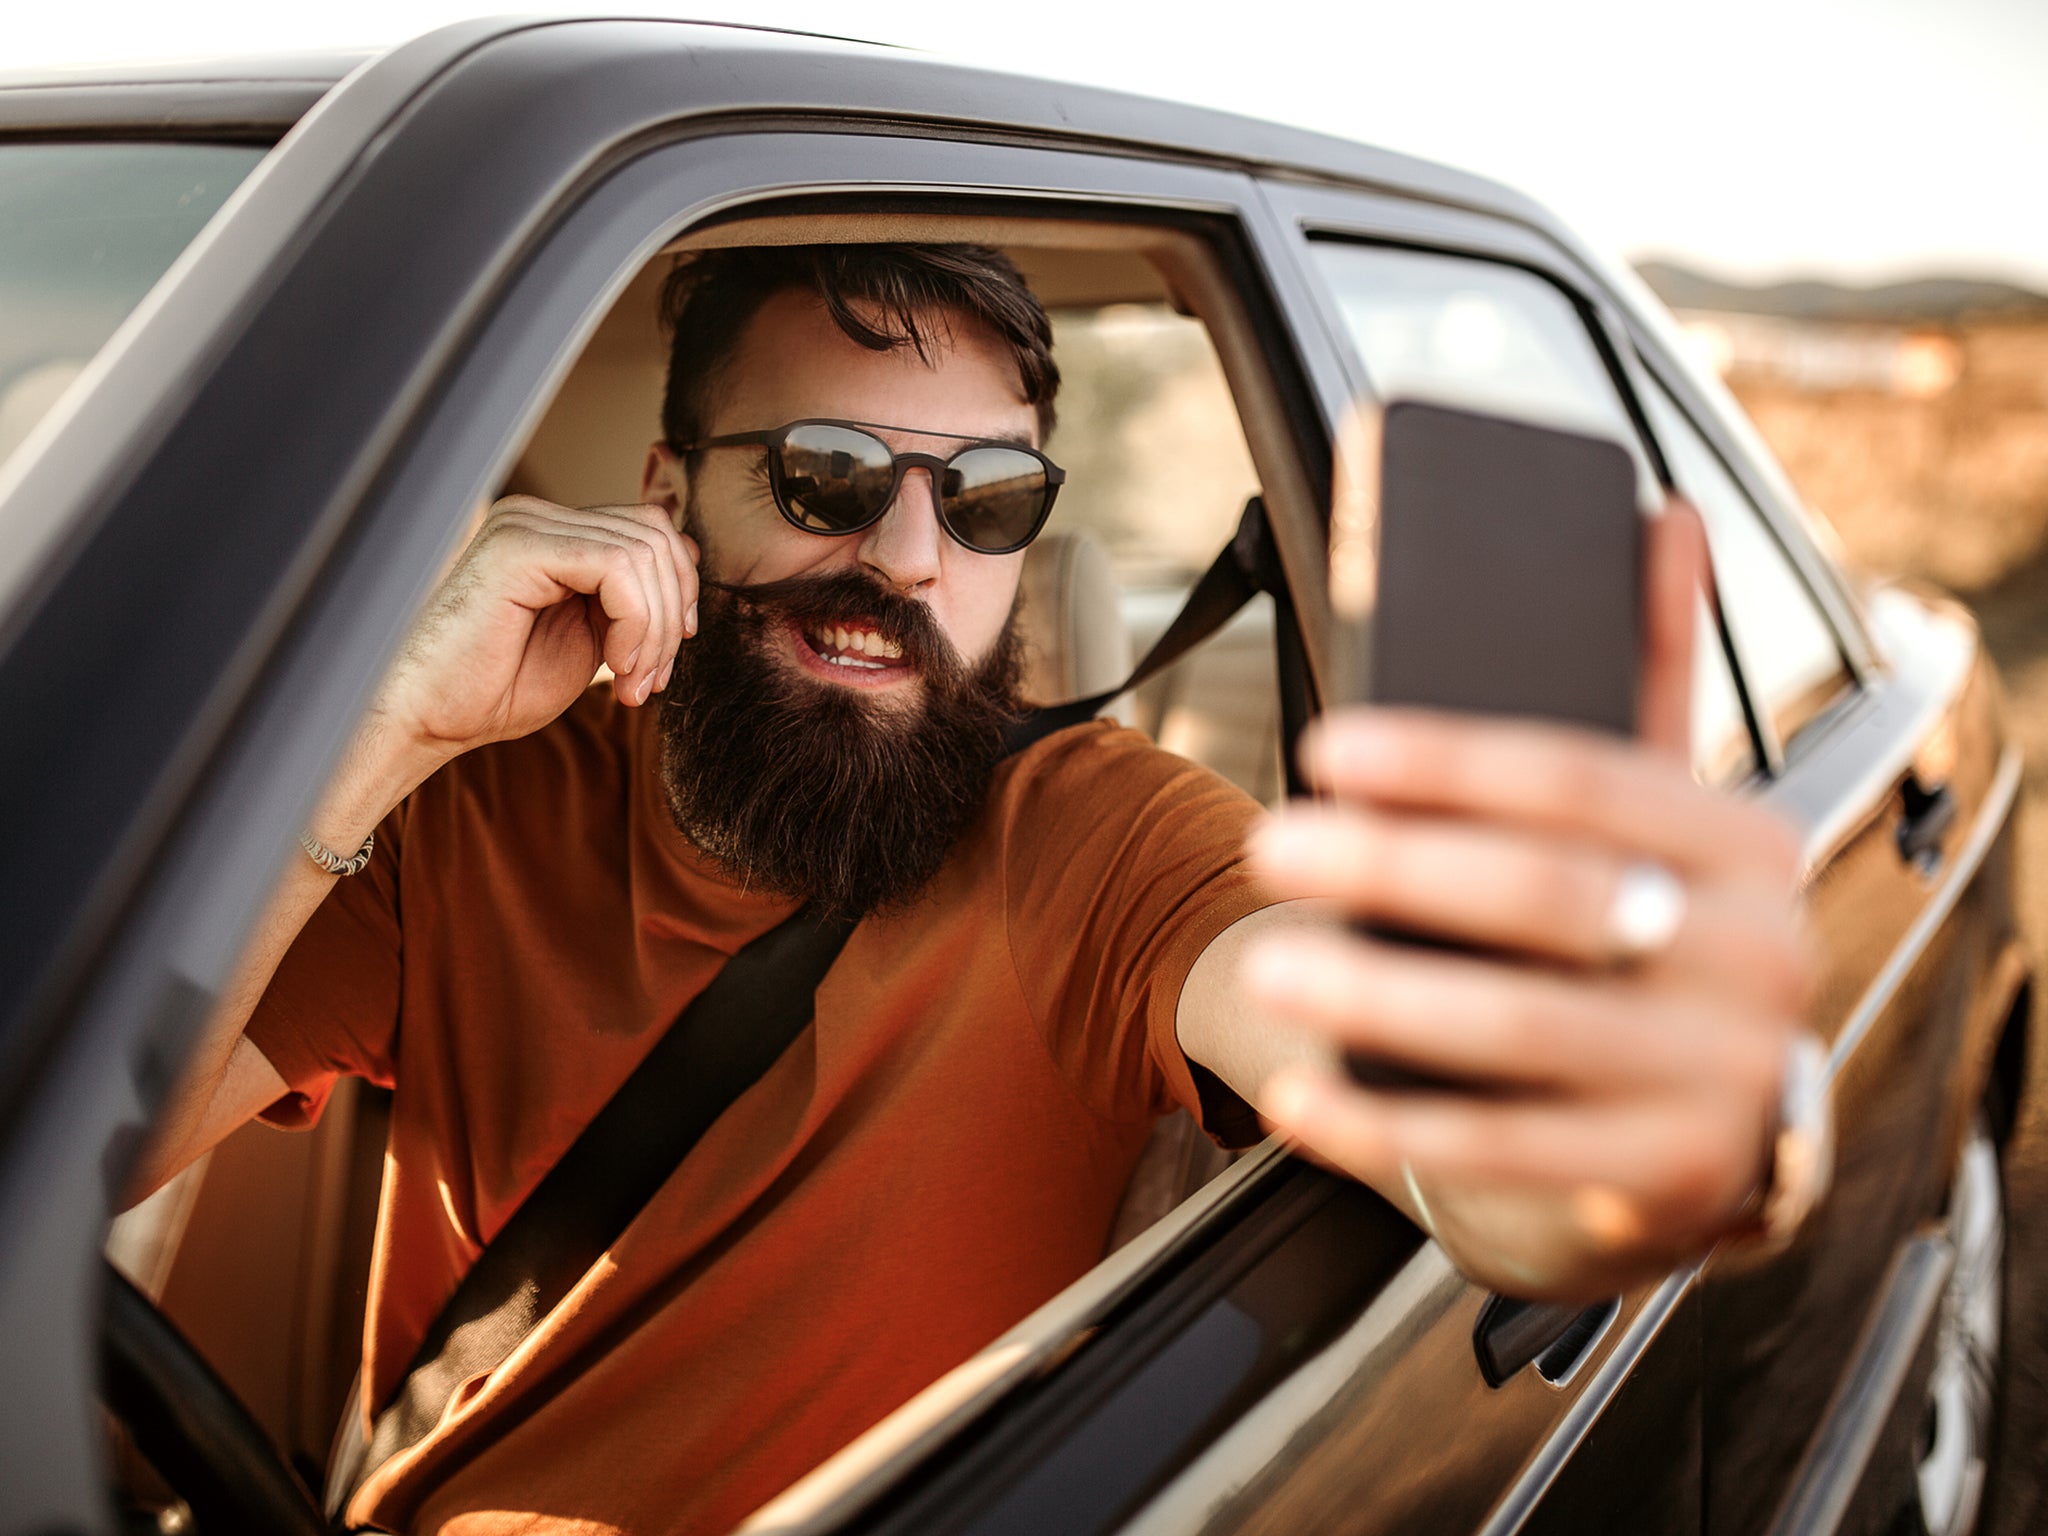 Reckless: one in 10 young adults are asked to take photos while driving